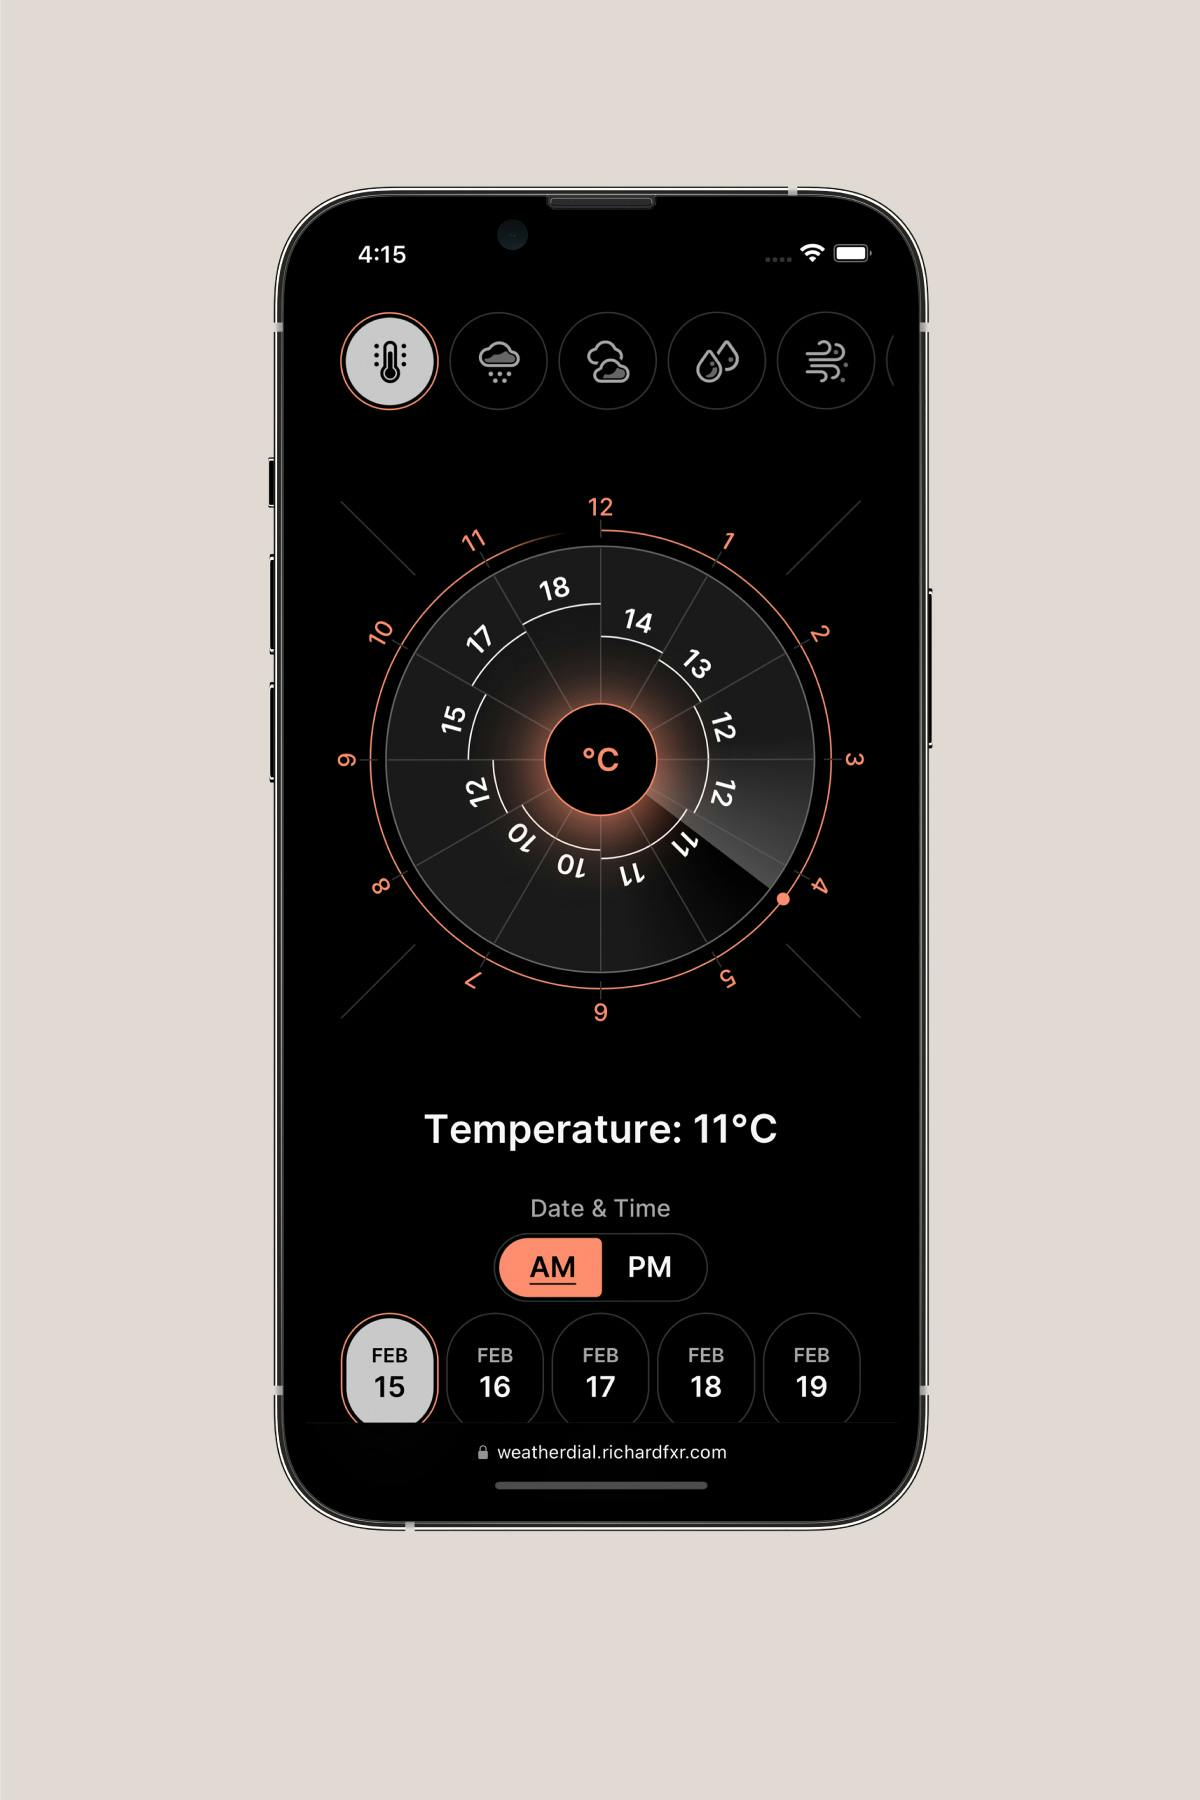 An iPhone 13 Pro displaying the temperature page in high-contrast dark mode.